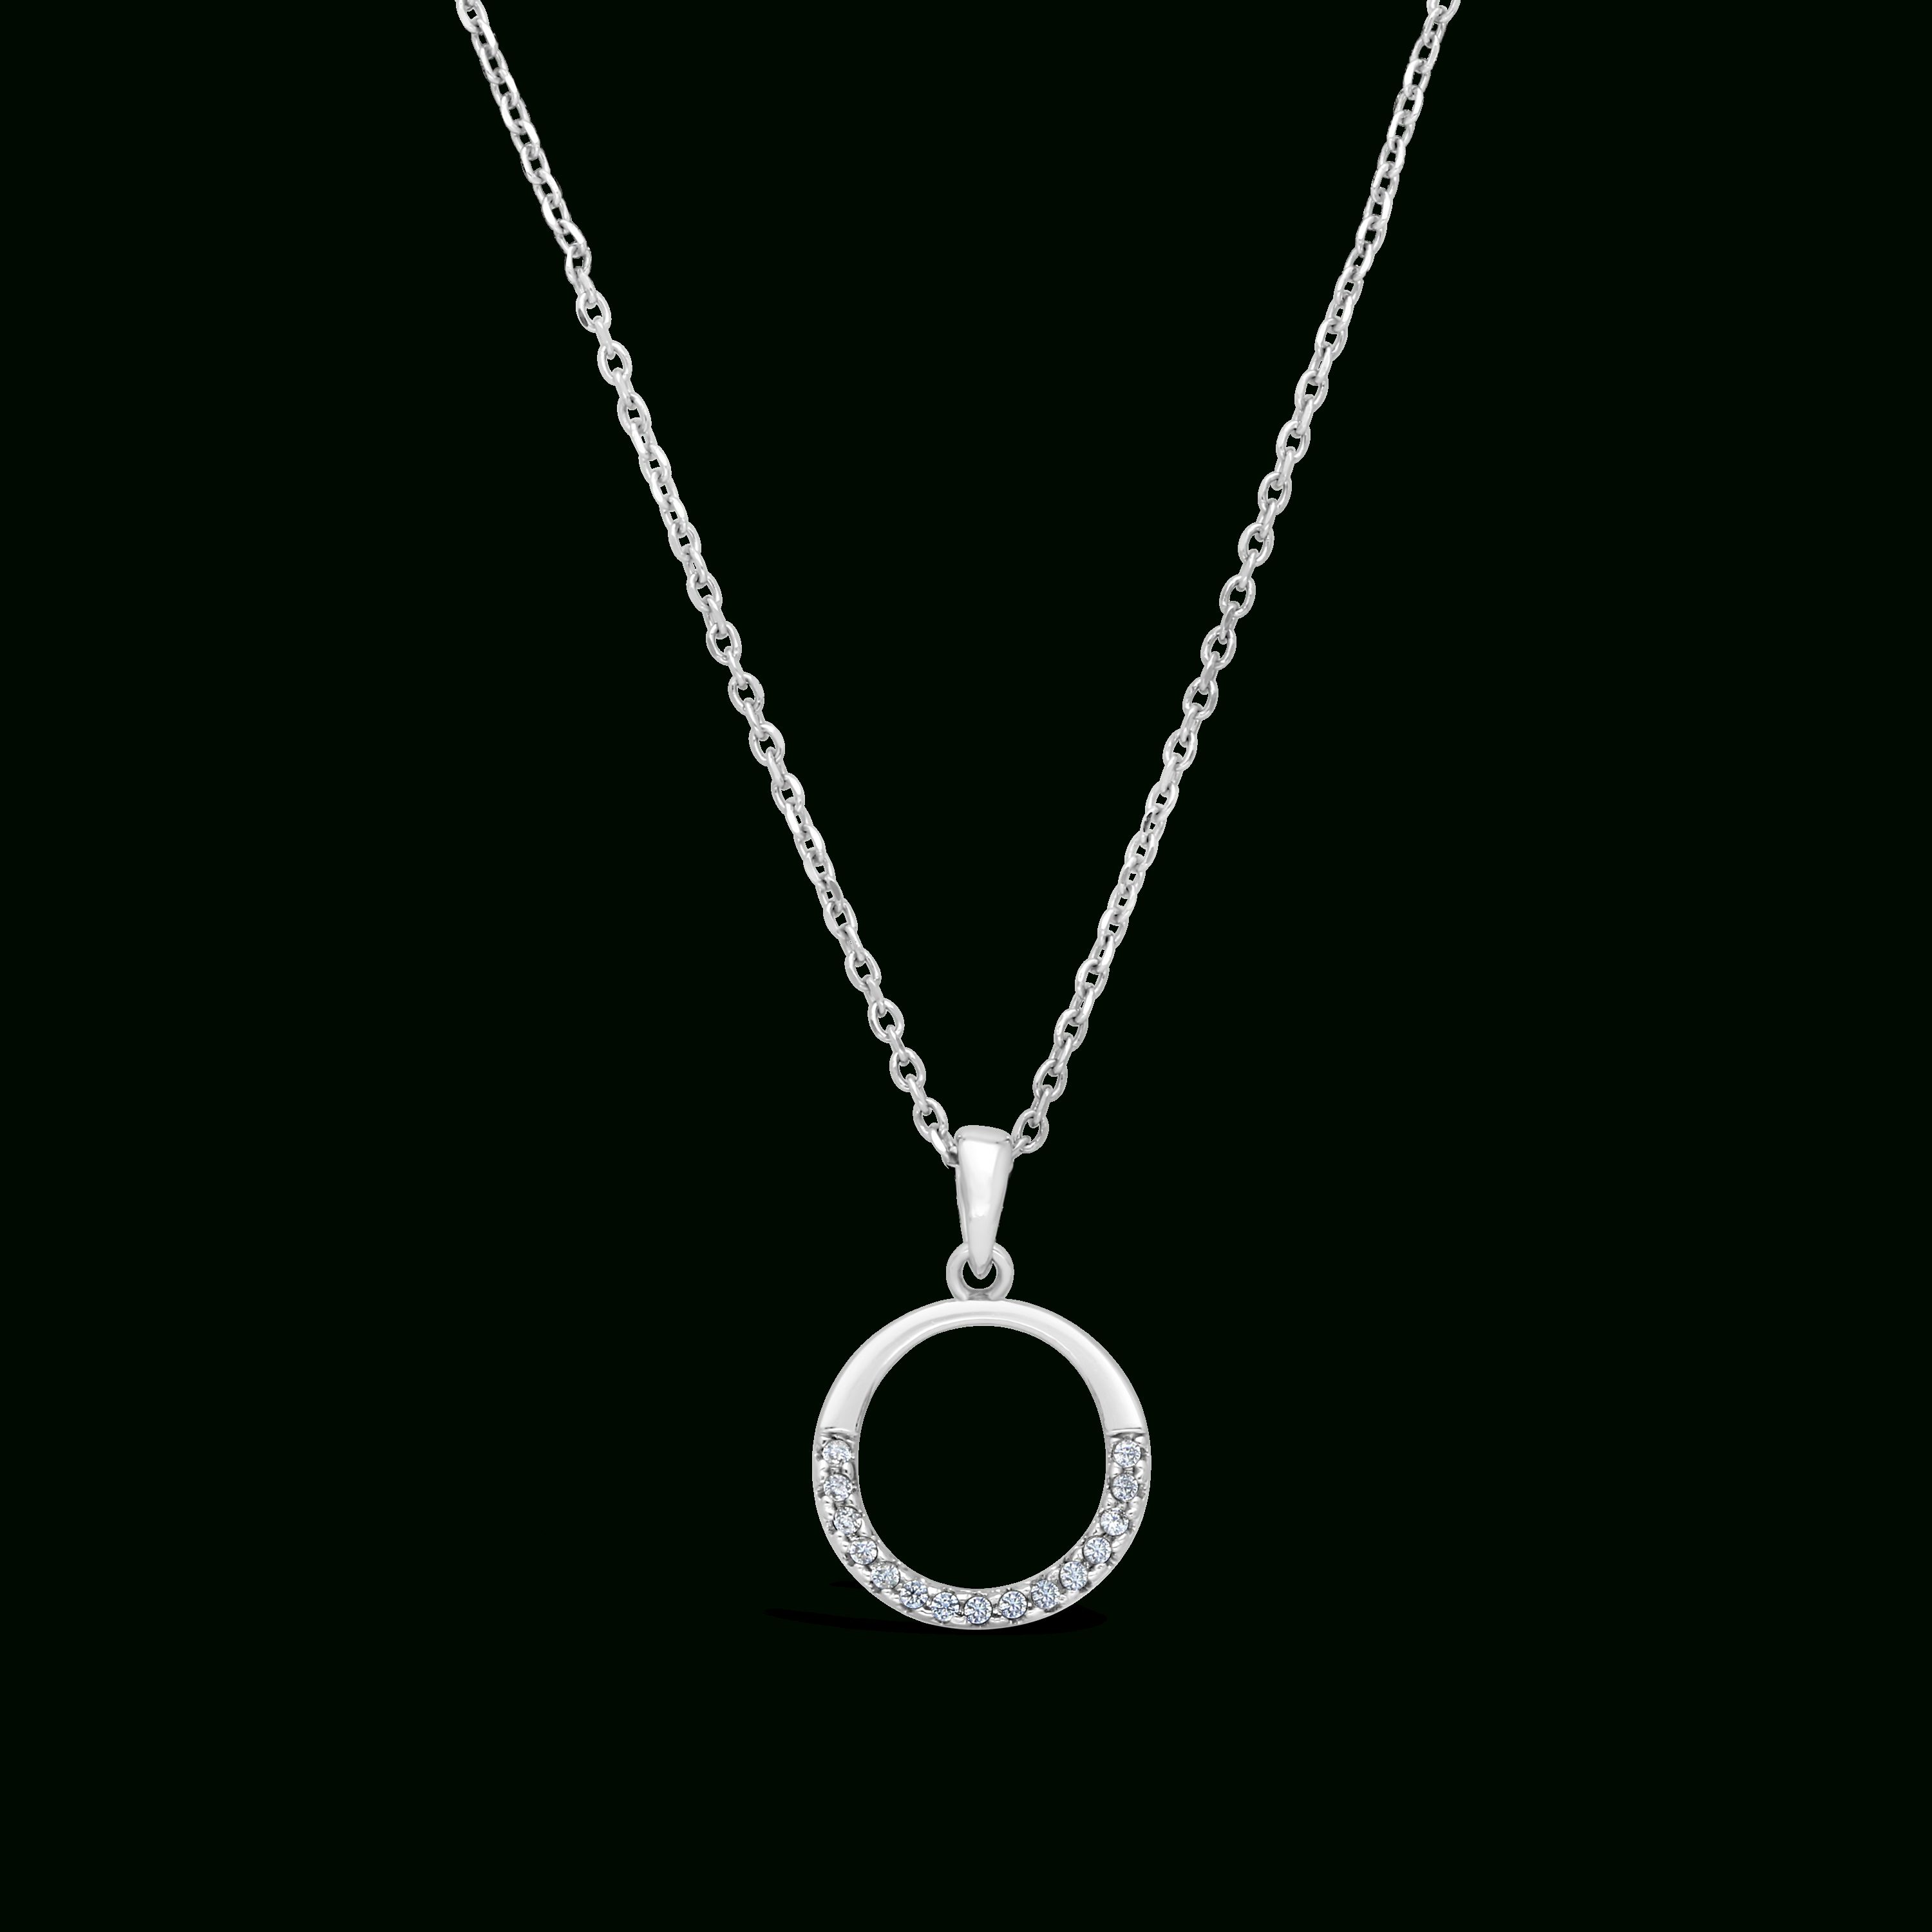 18ct White Gold Small Circle Of Life Diamond Pendant Throughout Most Popular Small Diamond Necklaces (View 7 of 25)